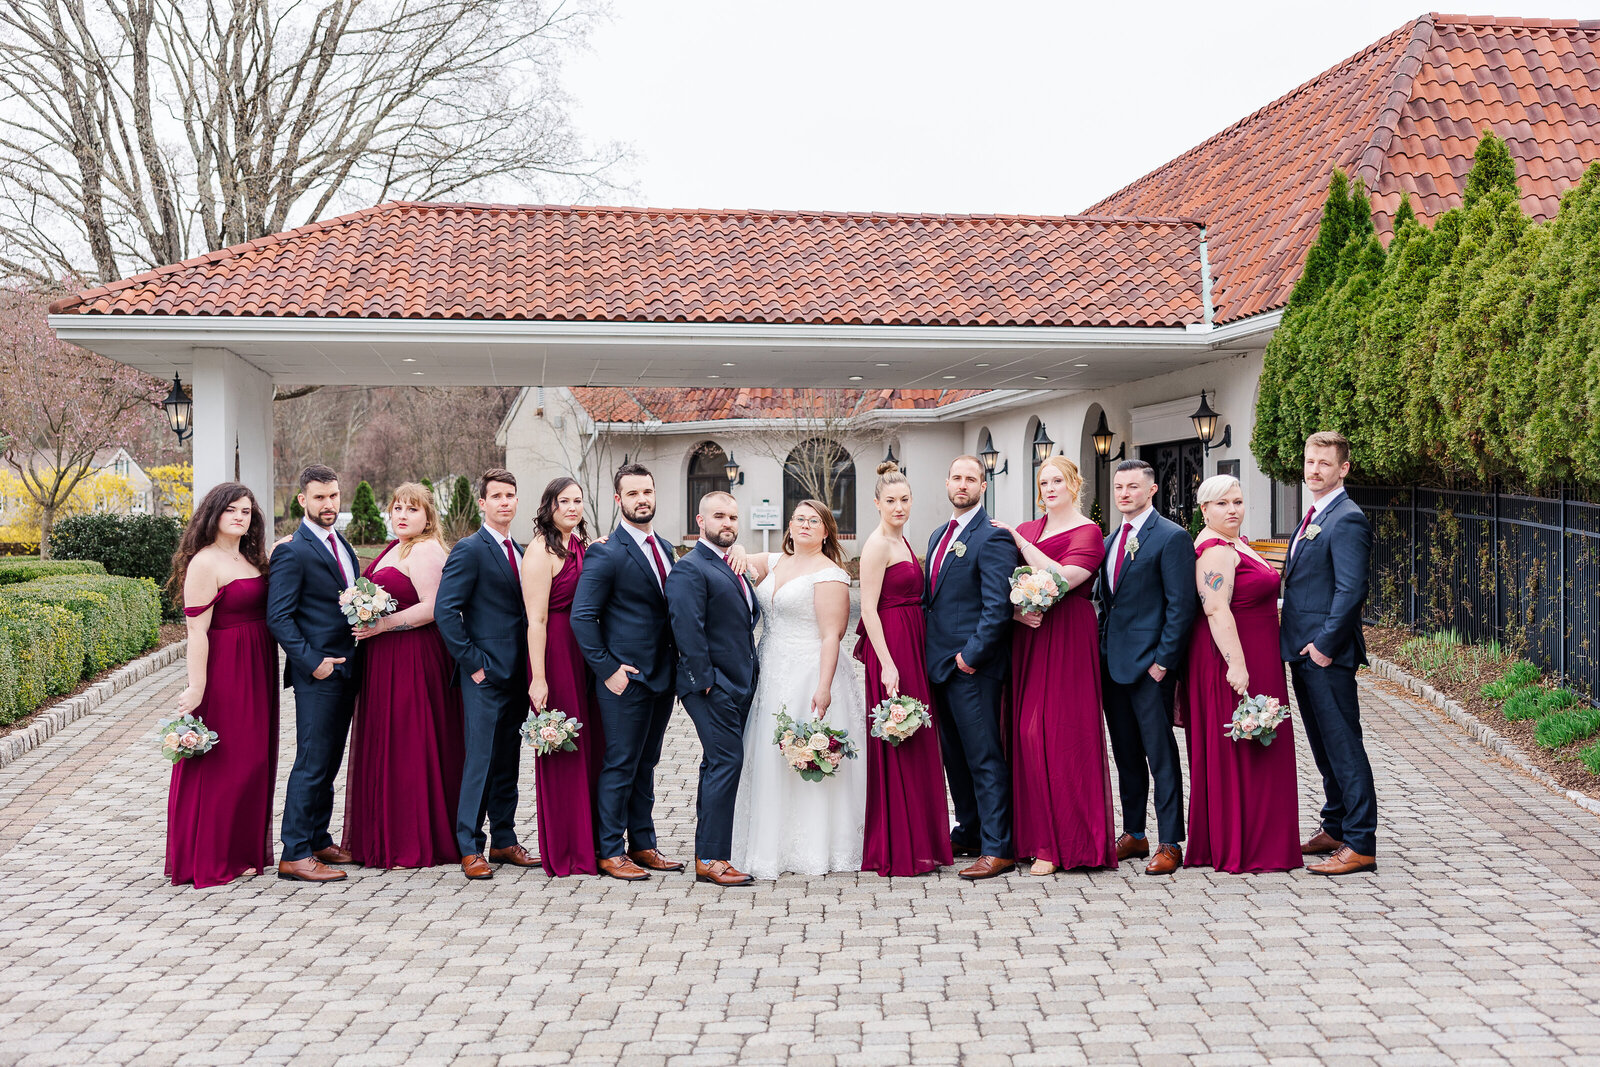 Editorial style wedding party image